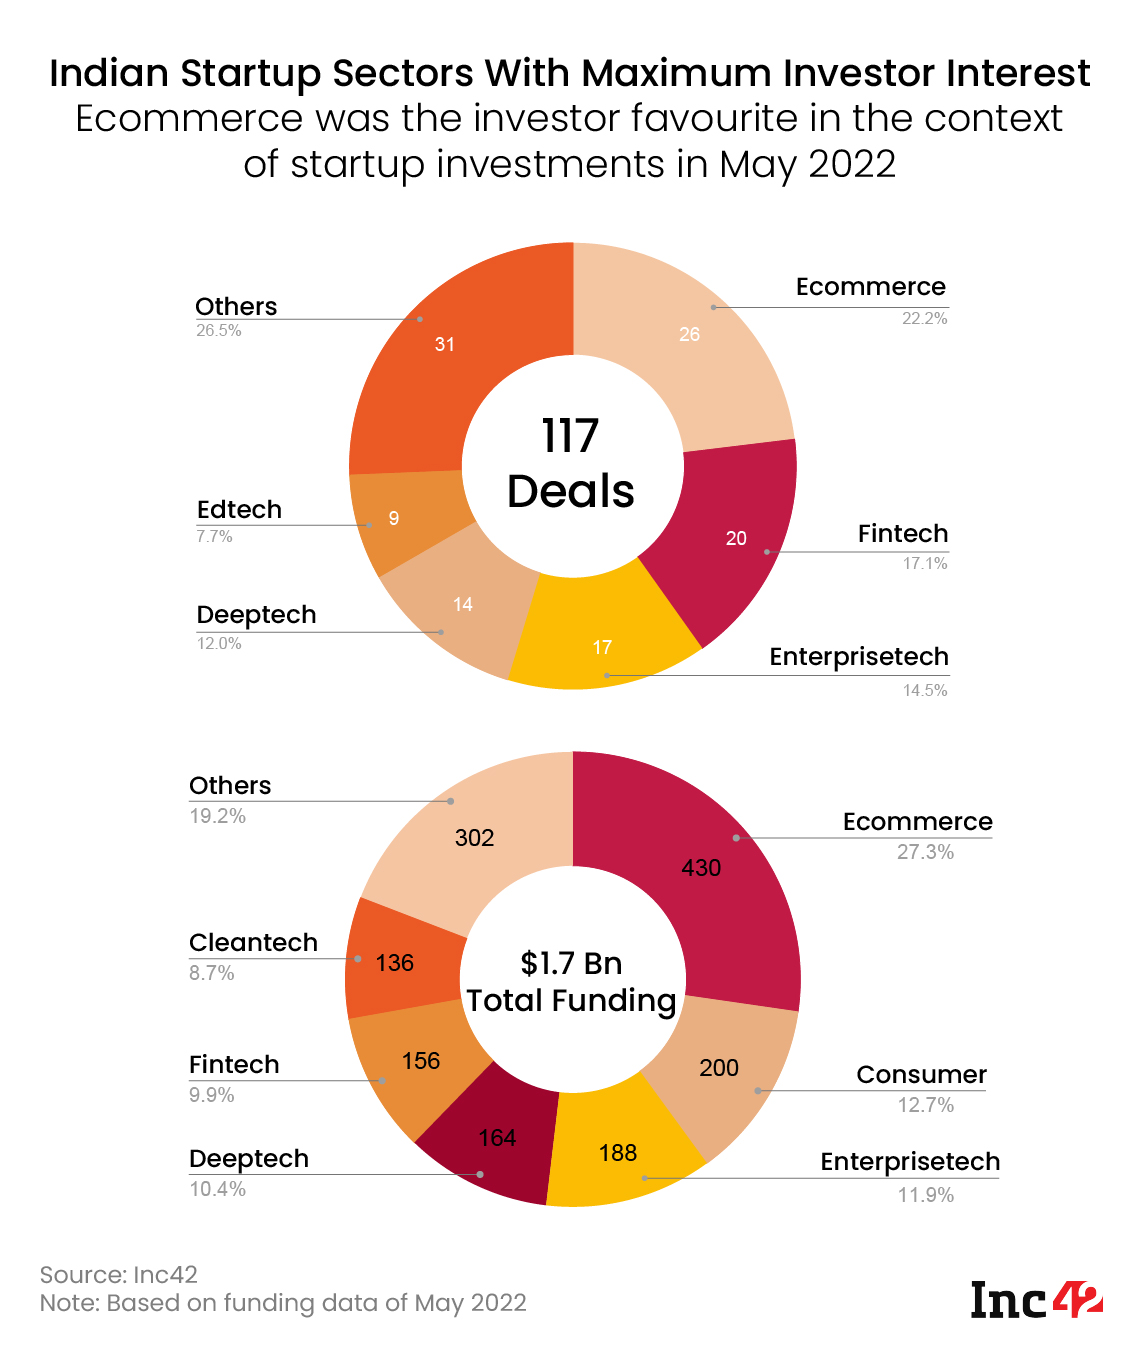 Ecommerce remained the preferred sector for investors in May 2022